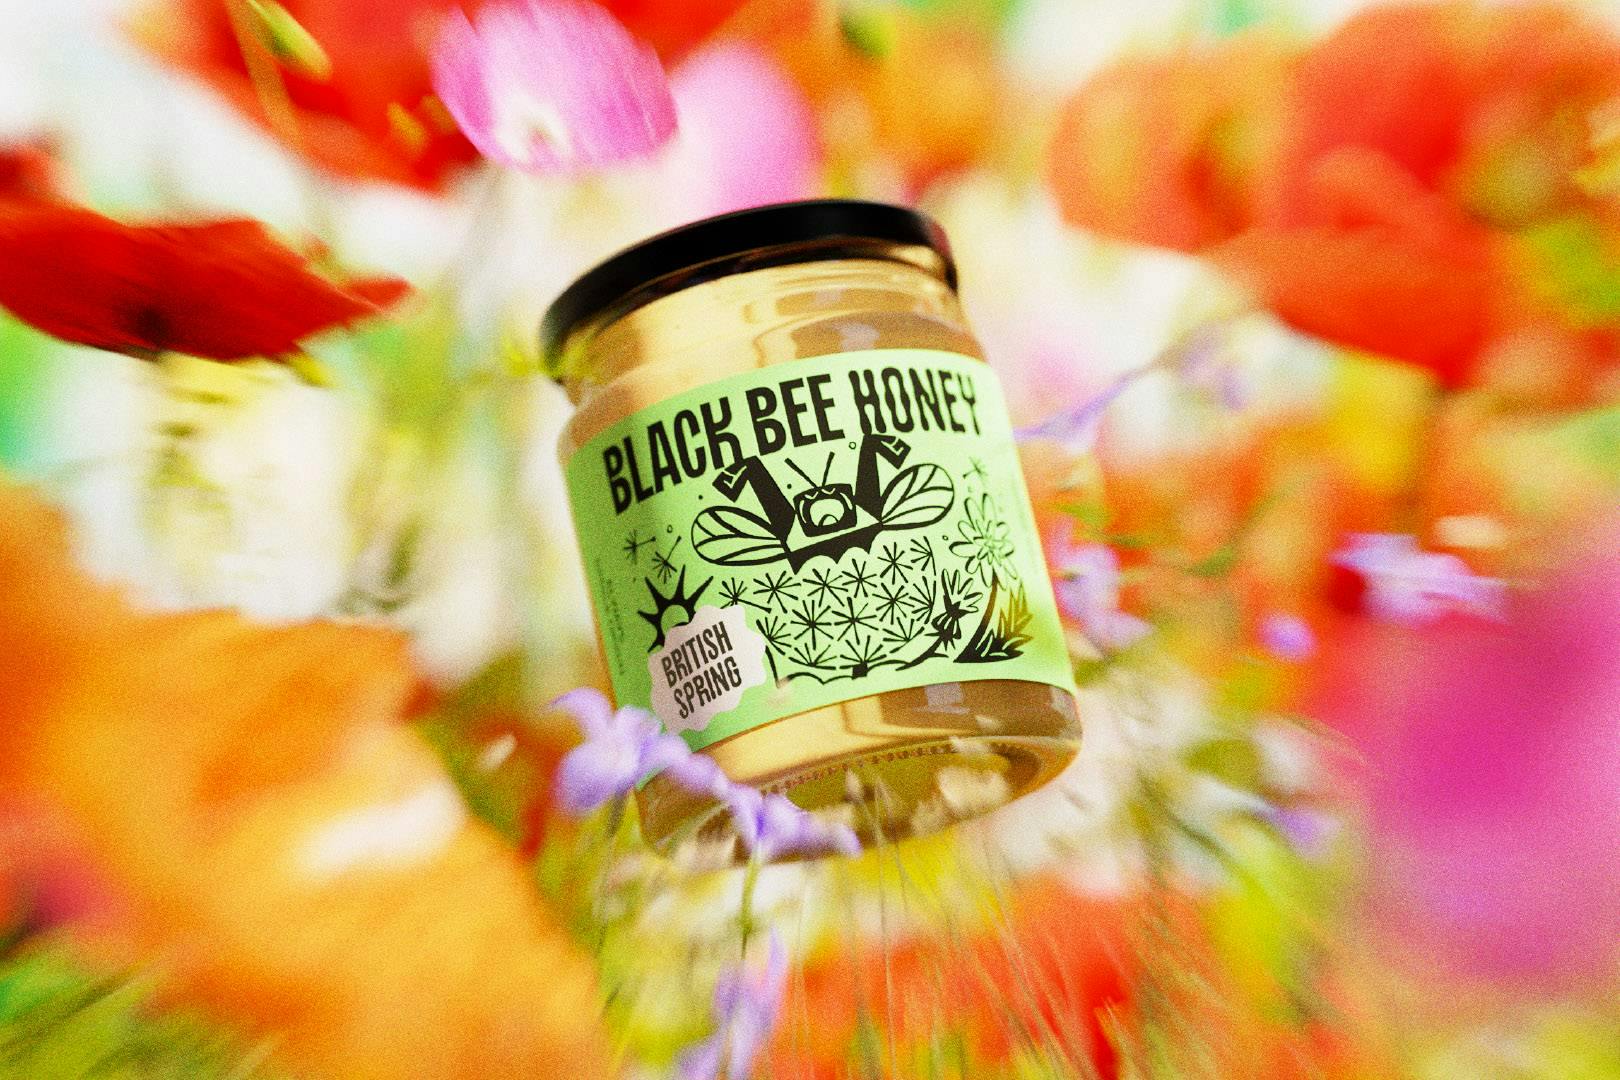 OMSE’s Black Bee Honey Design Offers Consumers a Peak Into the World of Bees